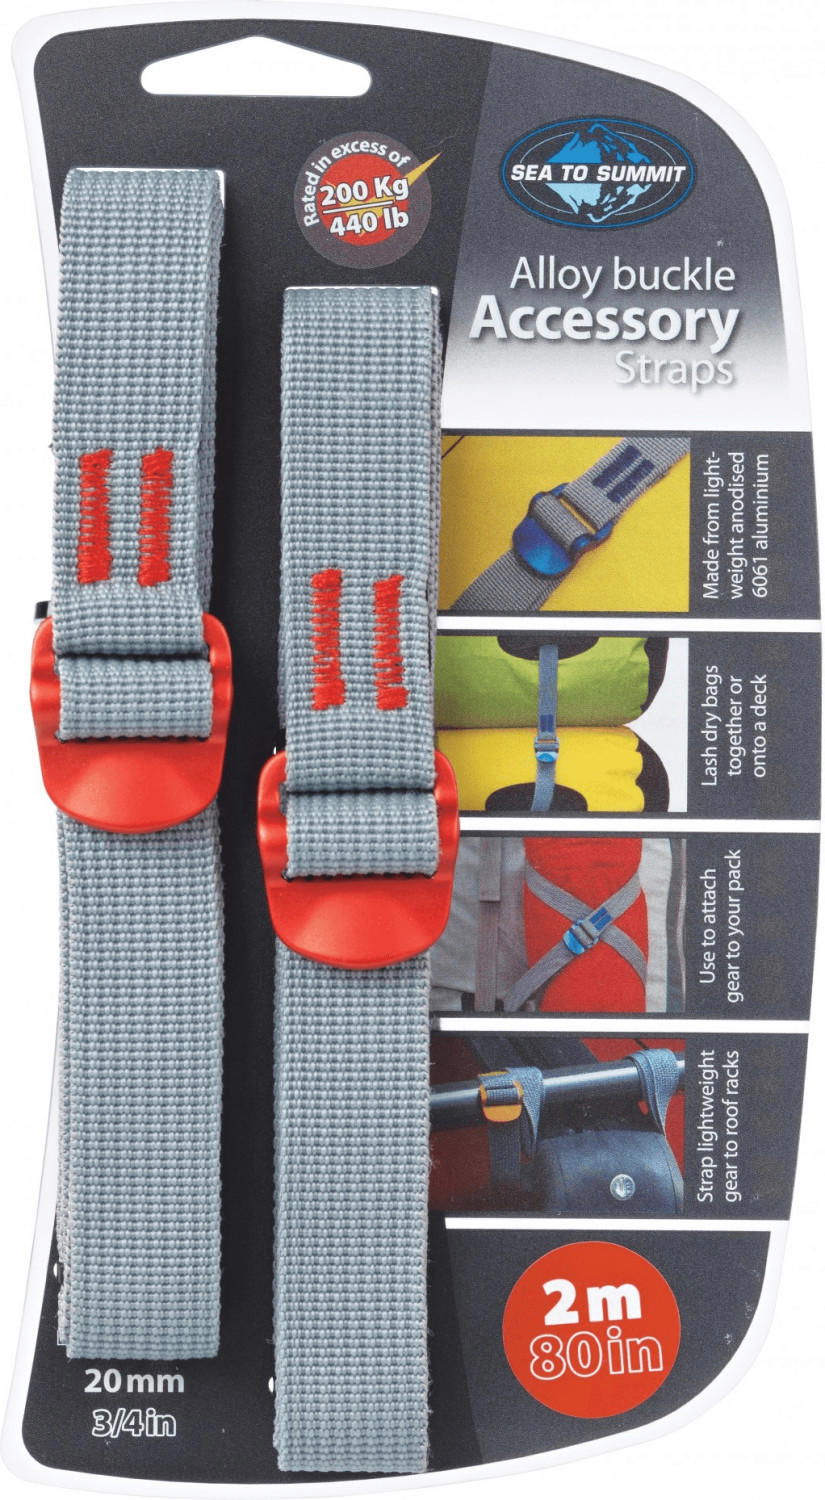 Sea to Summit Alloy Buckle Accessory Straps 20mm/2m red (ATDAS202)